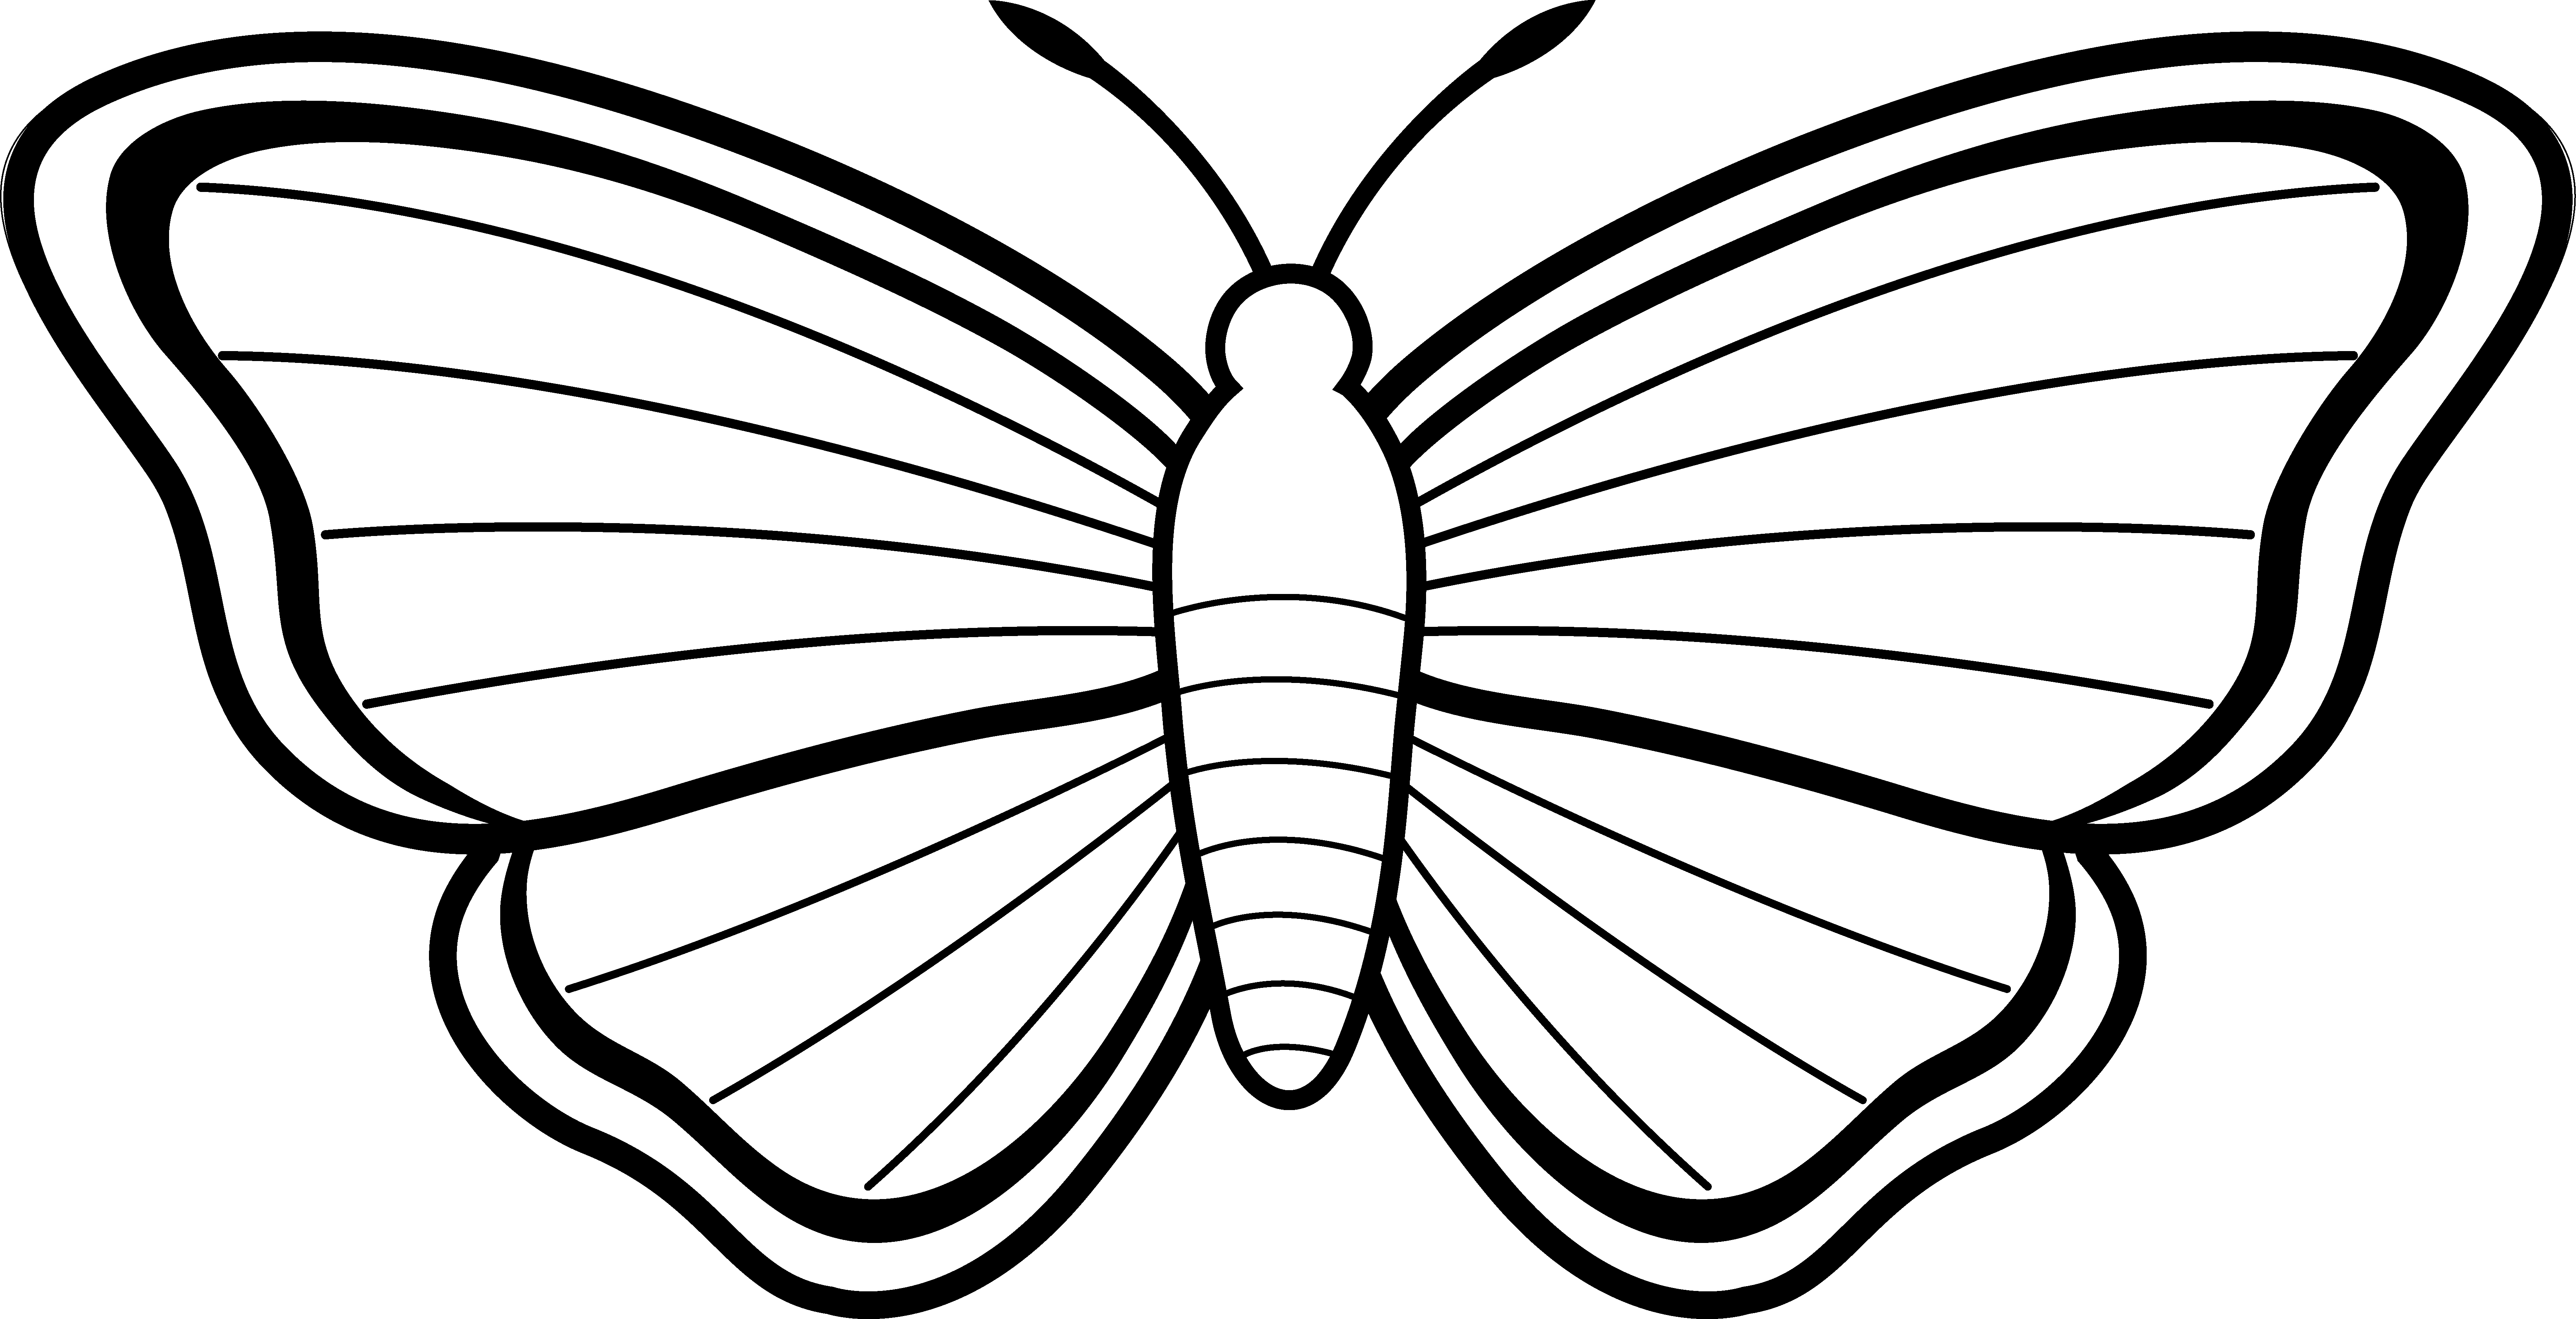 Butterfly outline panda free. Insect clipart dead insect